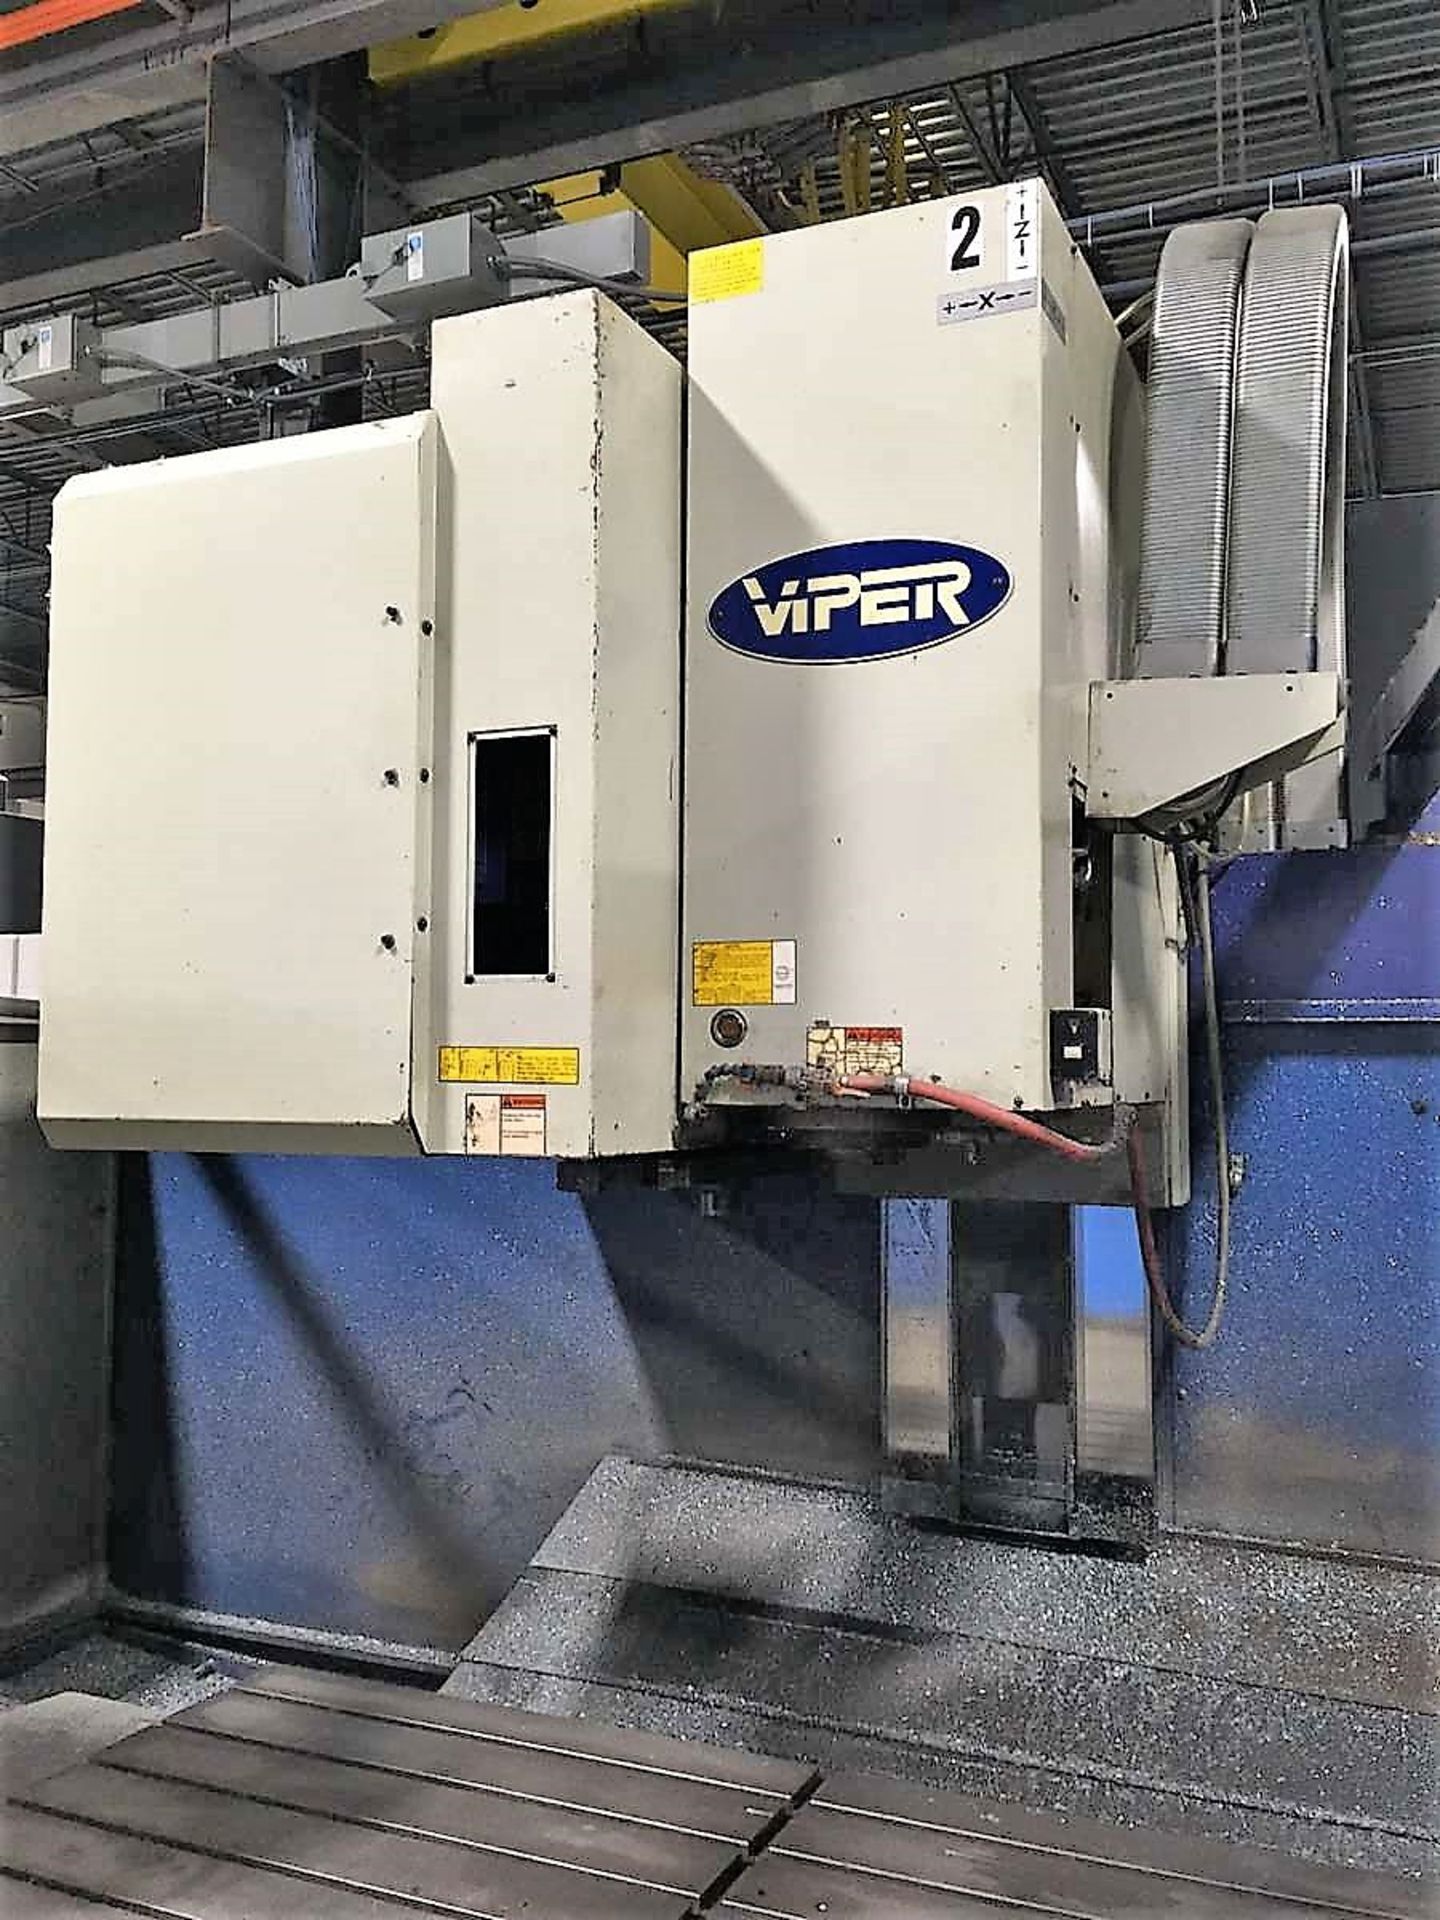 63"X30" MIGHTY VIPER VMC 1500AG/HV-70A CNC VERTICAL MACHINING CENTER, S/N 2755 - Image 3 of 7